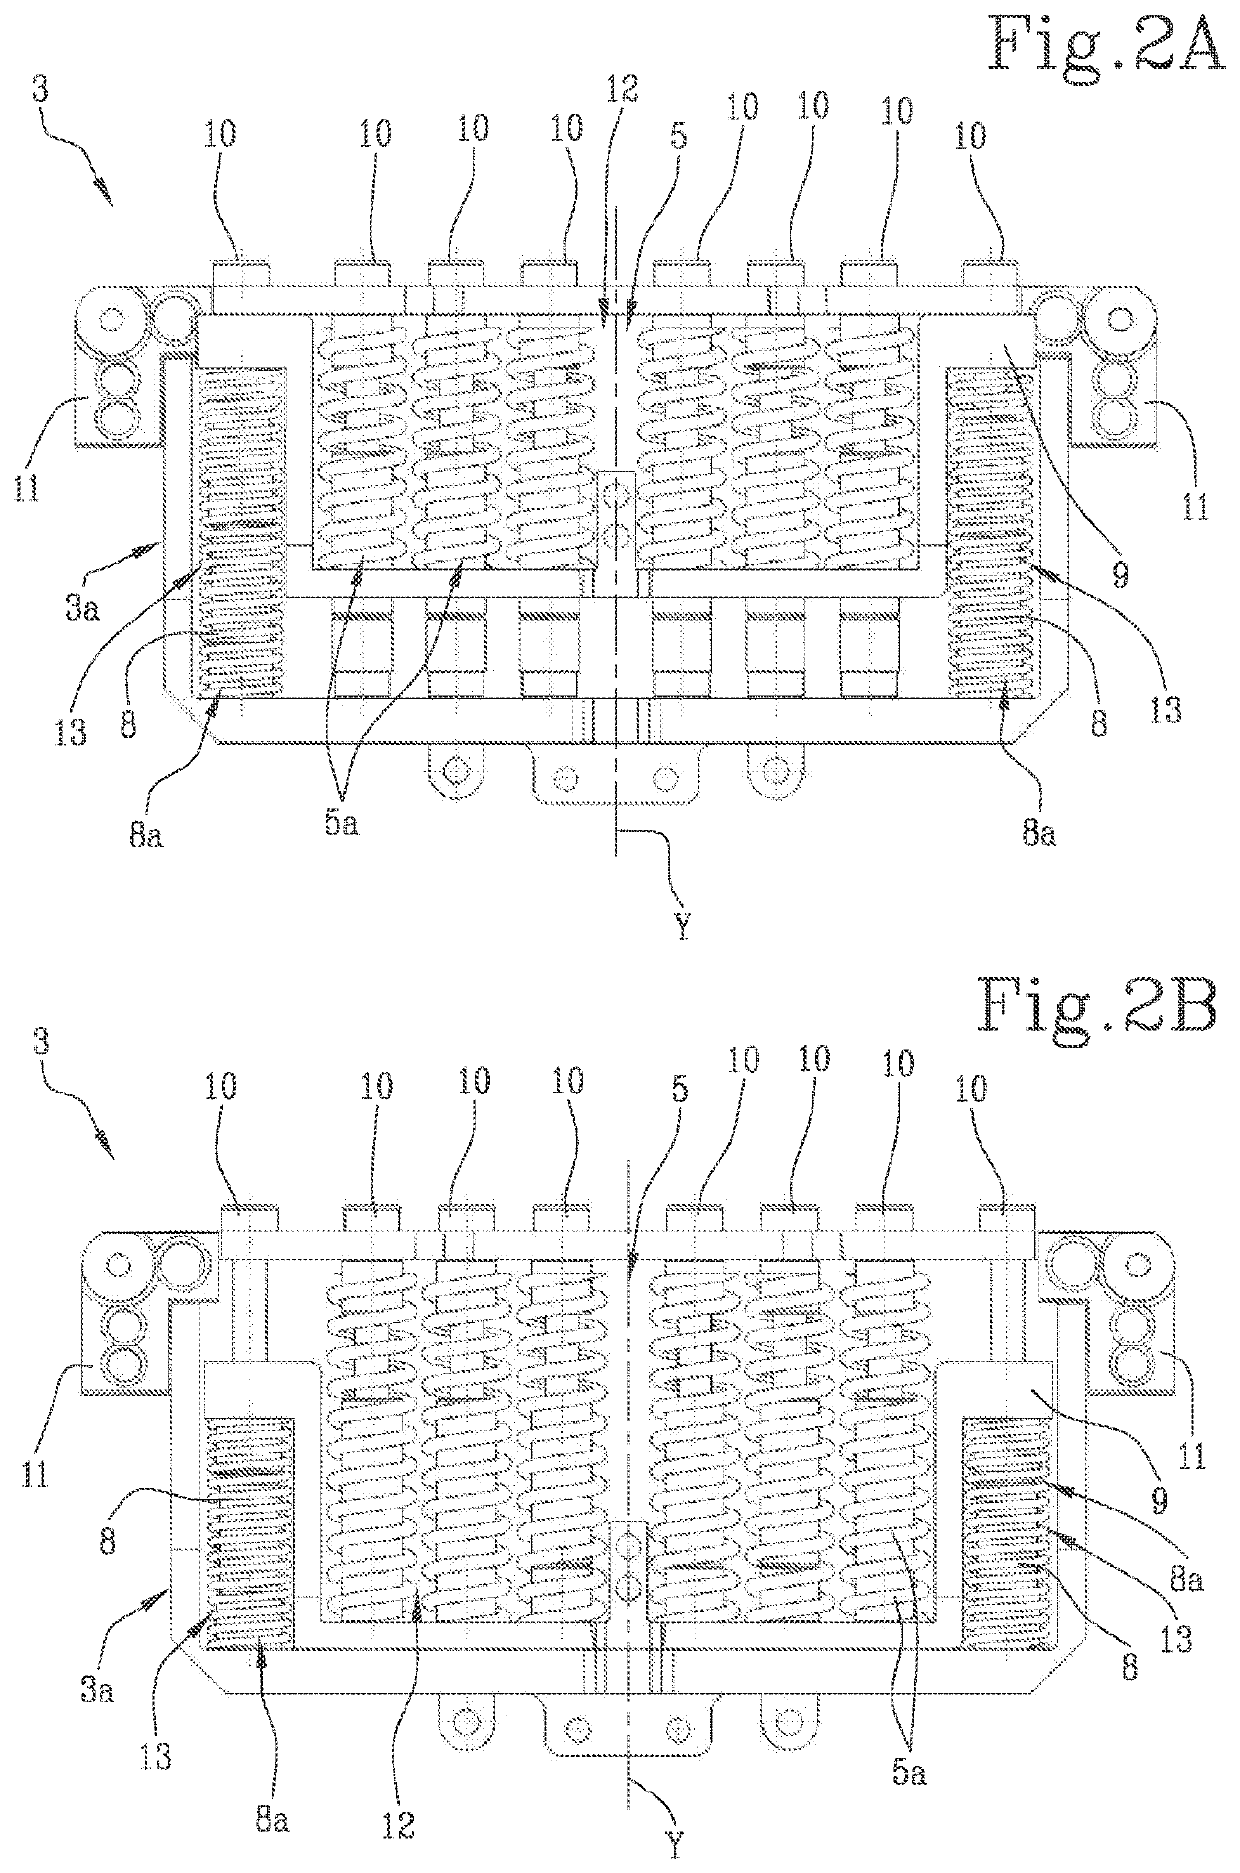 Device for regulating a cooling air flow in a vehicle